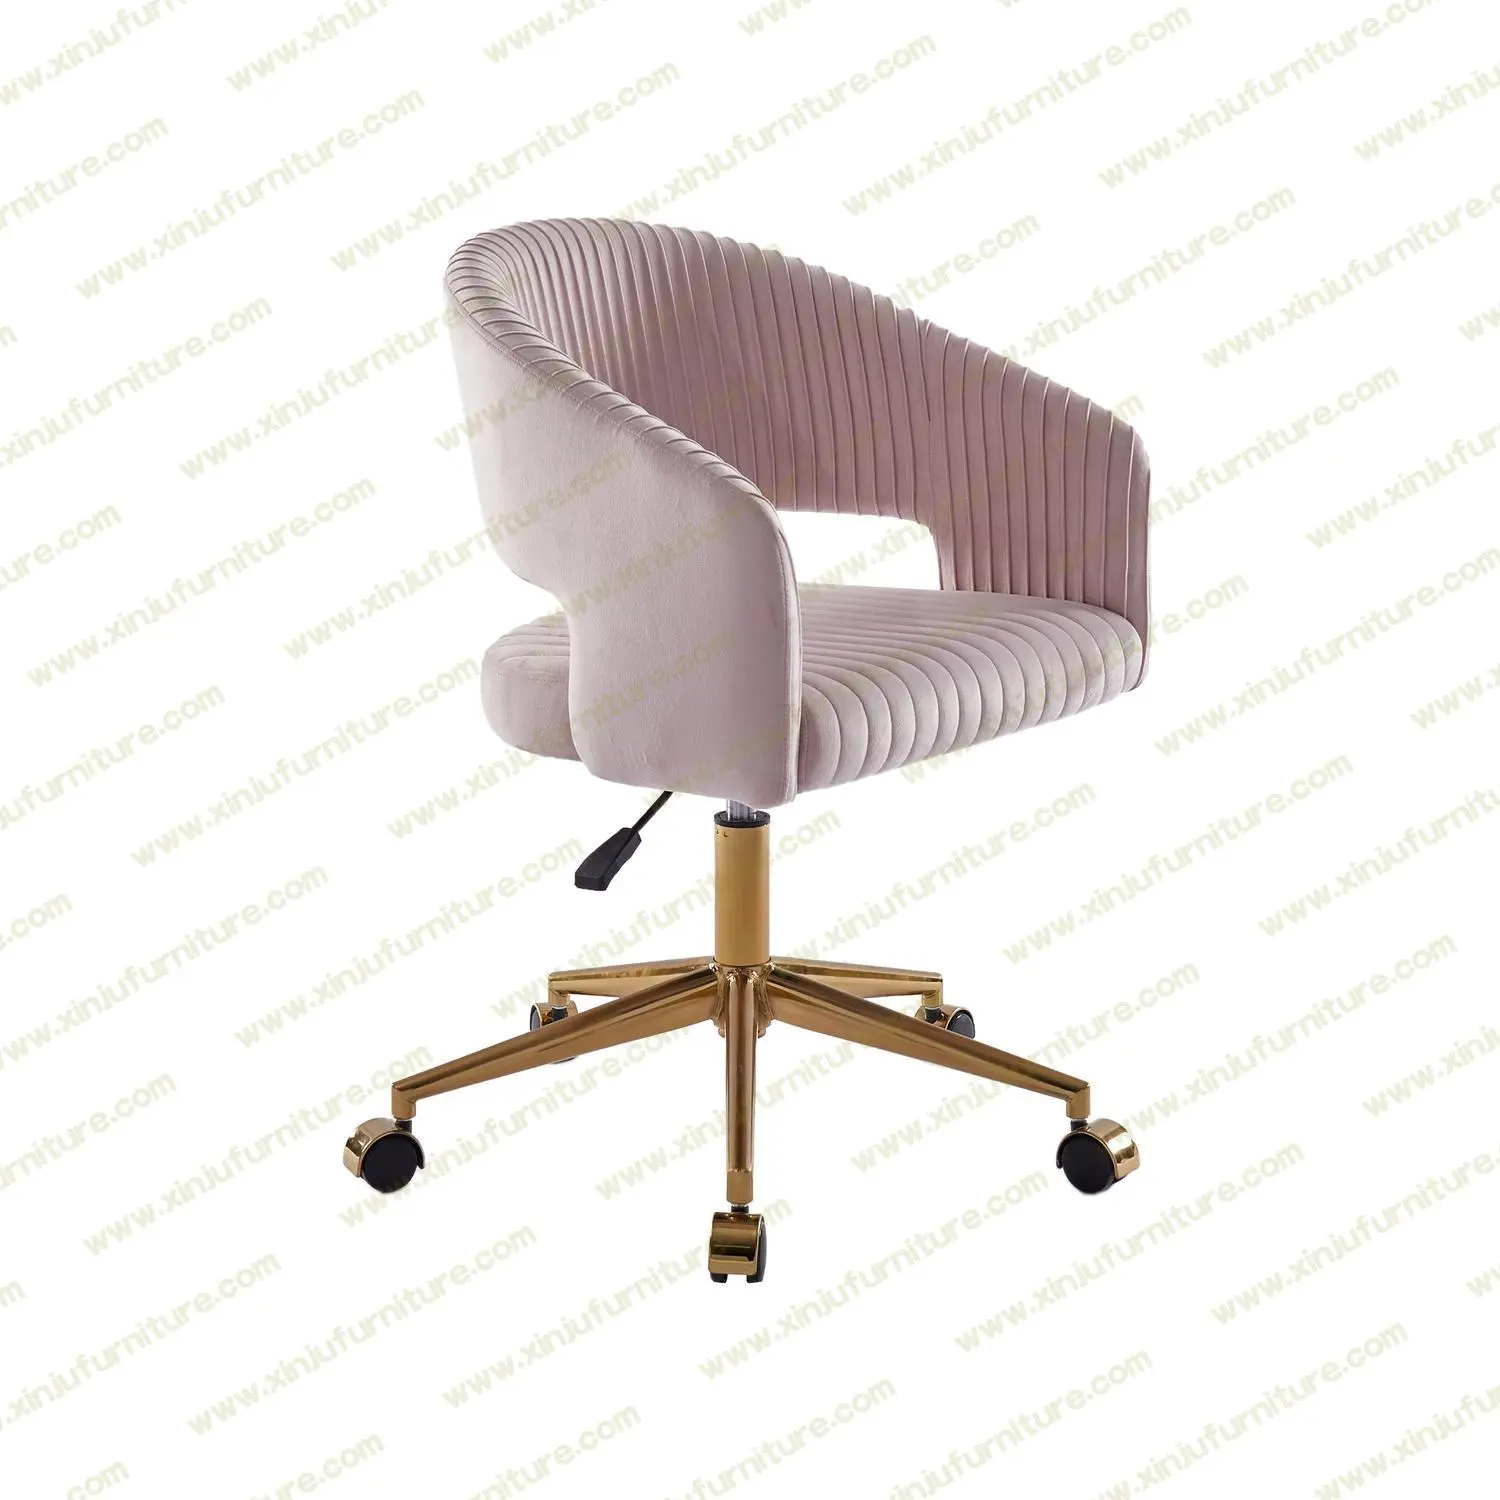 Simple removable tufted office chair stripe Pink